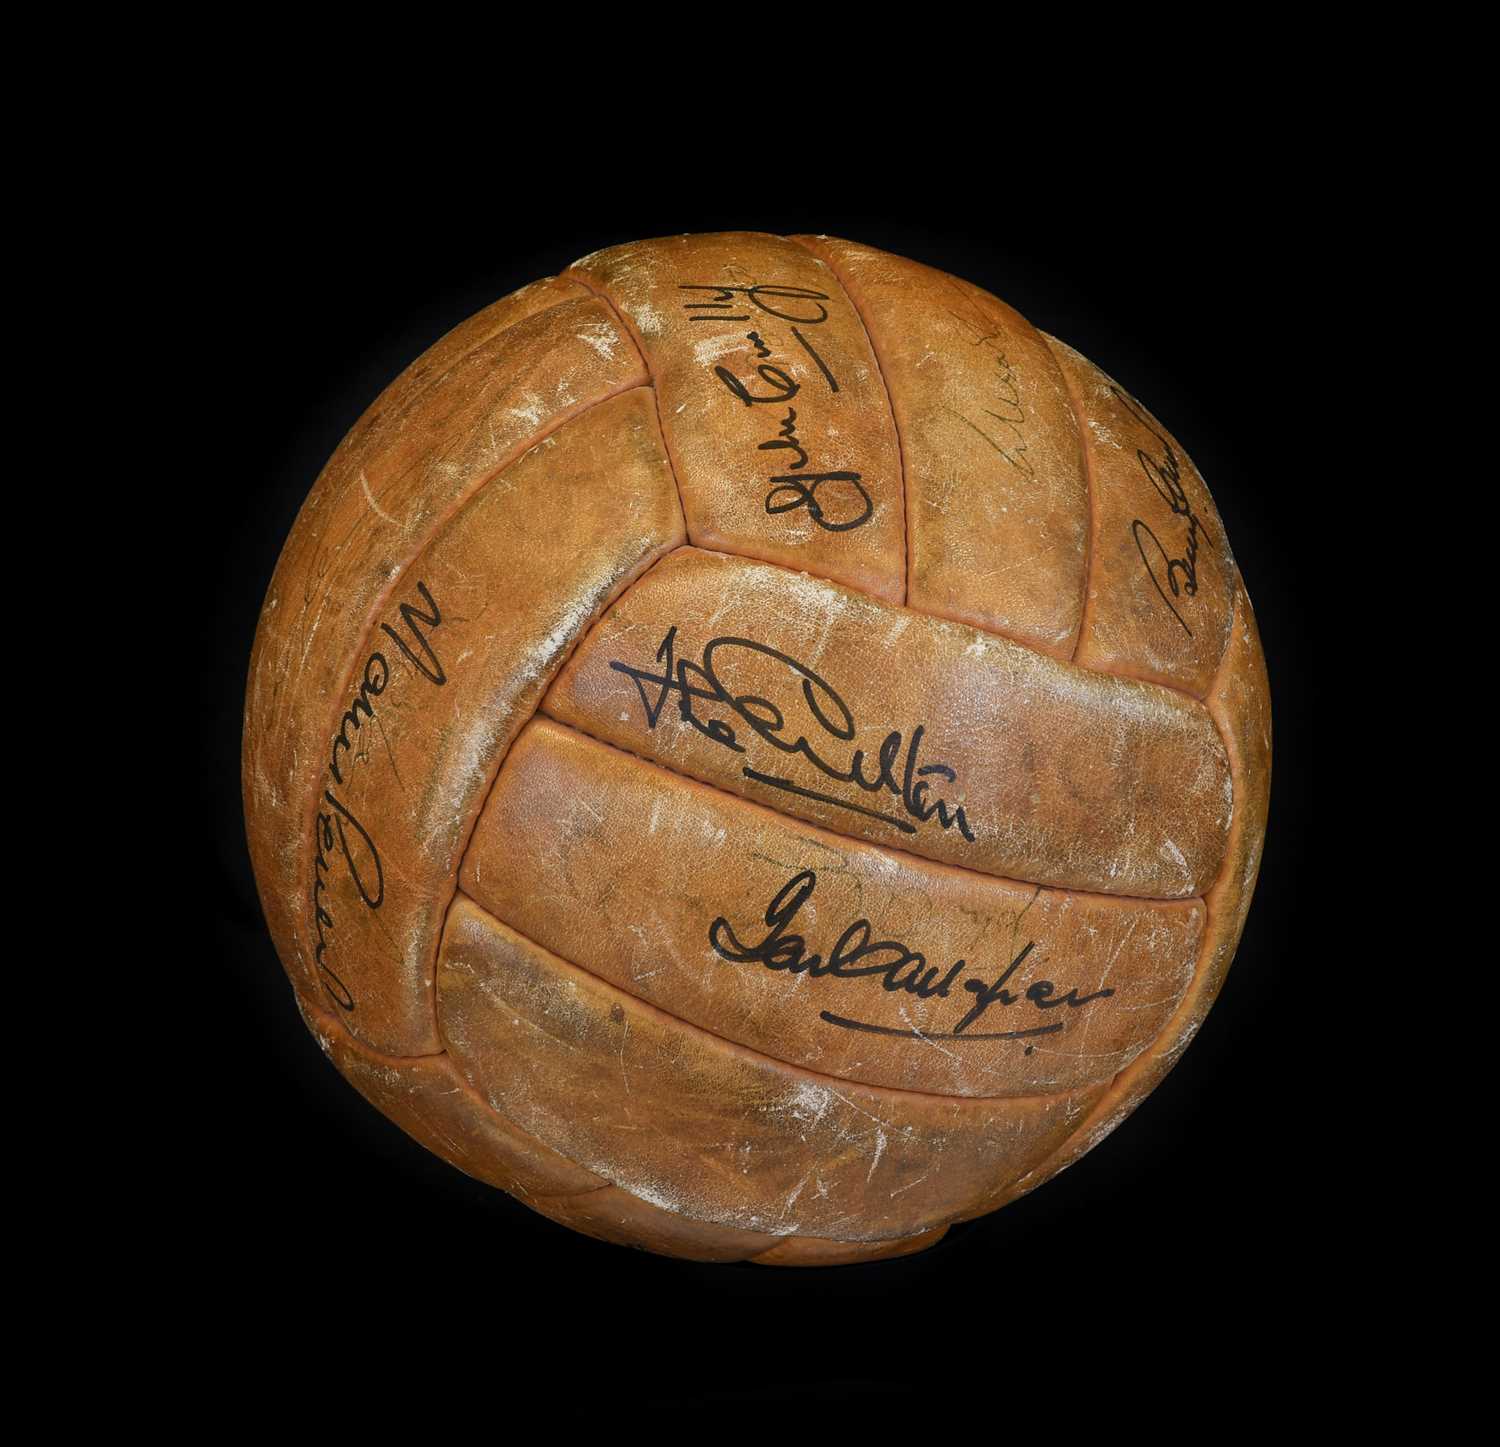 World Cup 1966 Football Signed By Members Of The England Squad - Image 2 of 3